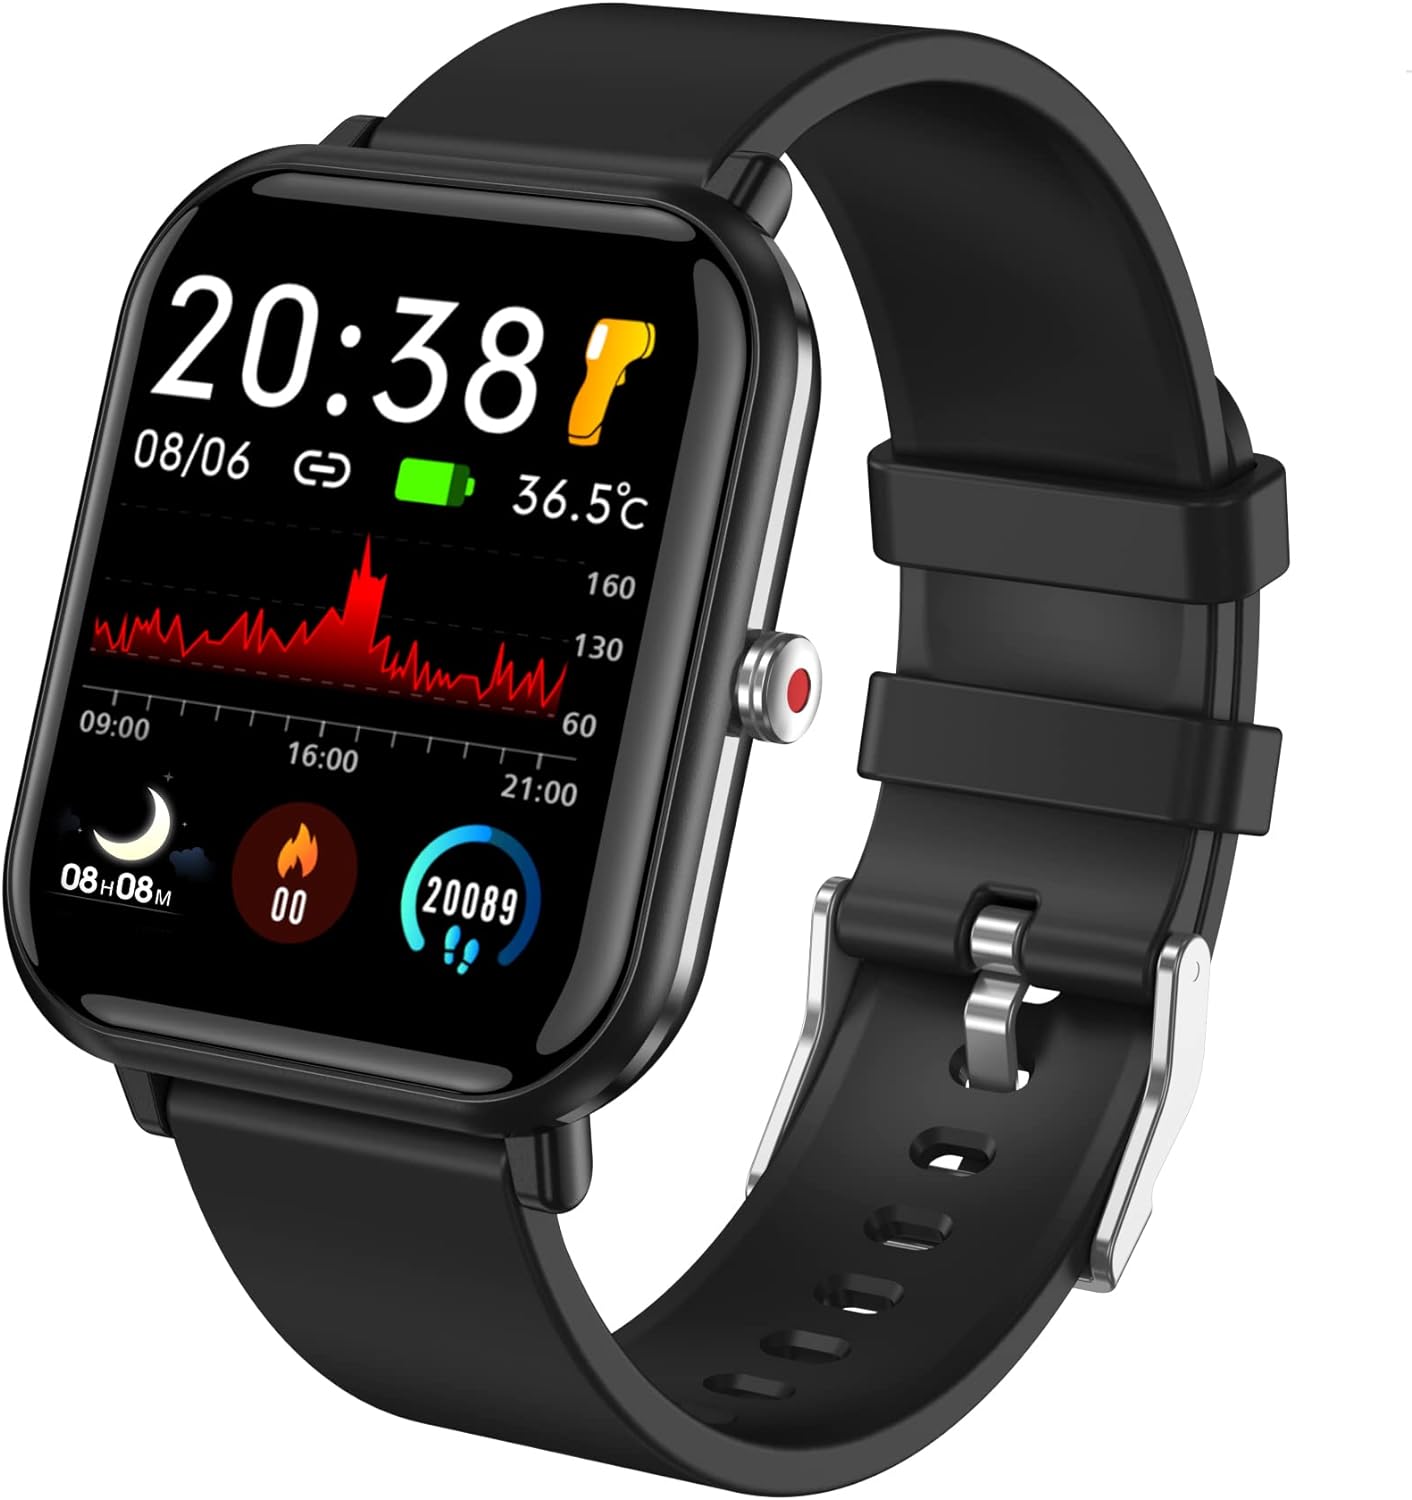 Smart Watch, Fitness Tracker with 24 Sports Modes, 5ATM Swimming Waterproof, Monitor Step Calorie Counter, 1.7" Touchscreen Smartwatch Fitness Watch for Android iPhone